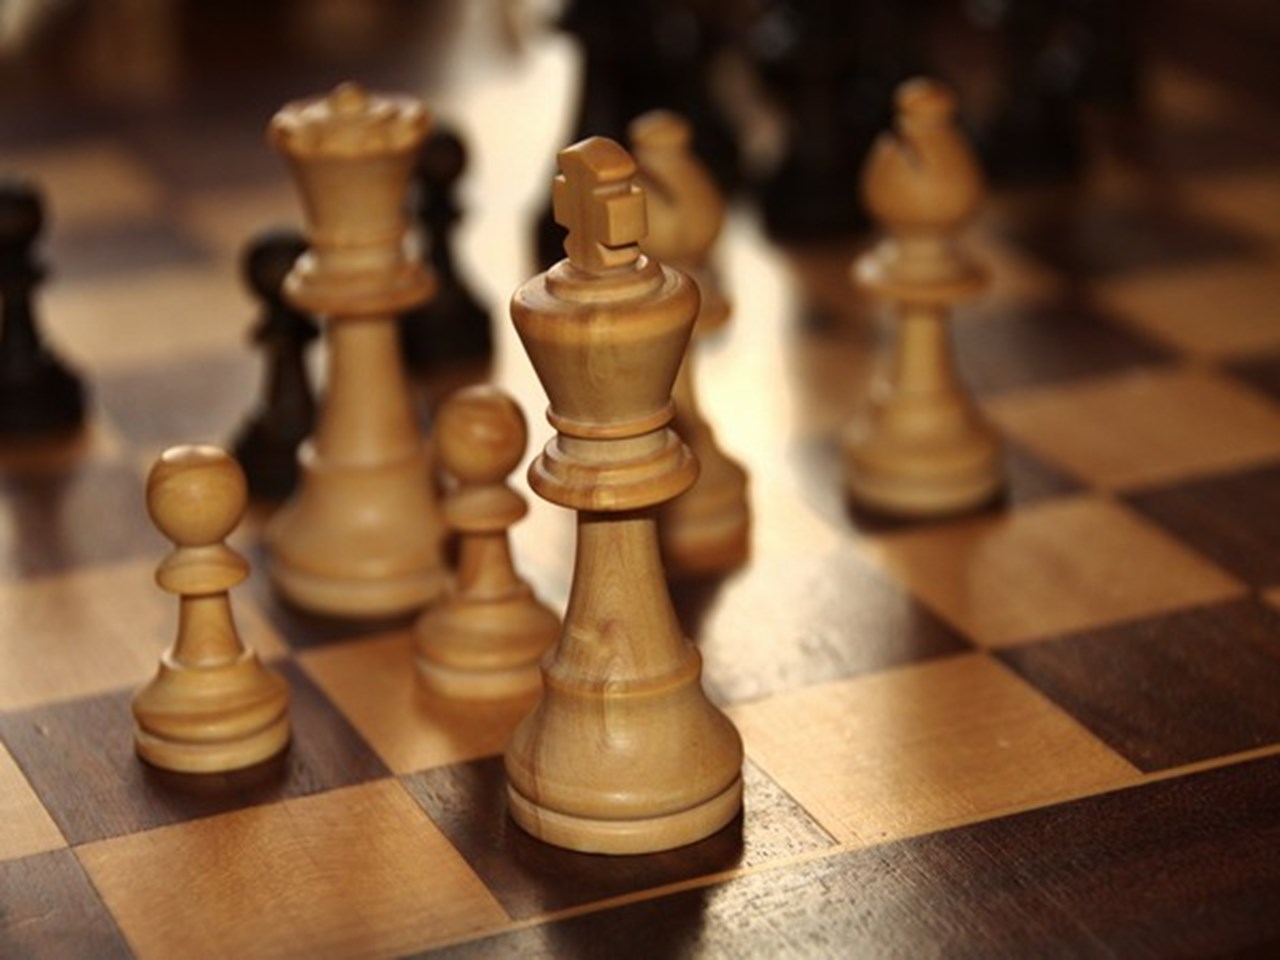 Chess Set Sales Have Skyrocketed Thanks To 'The Queen's Gambit' On